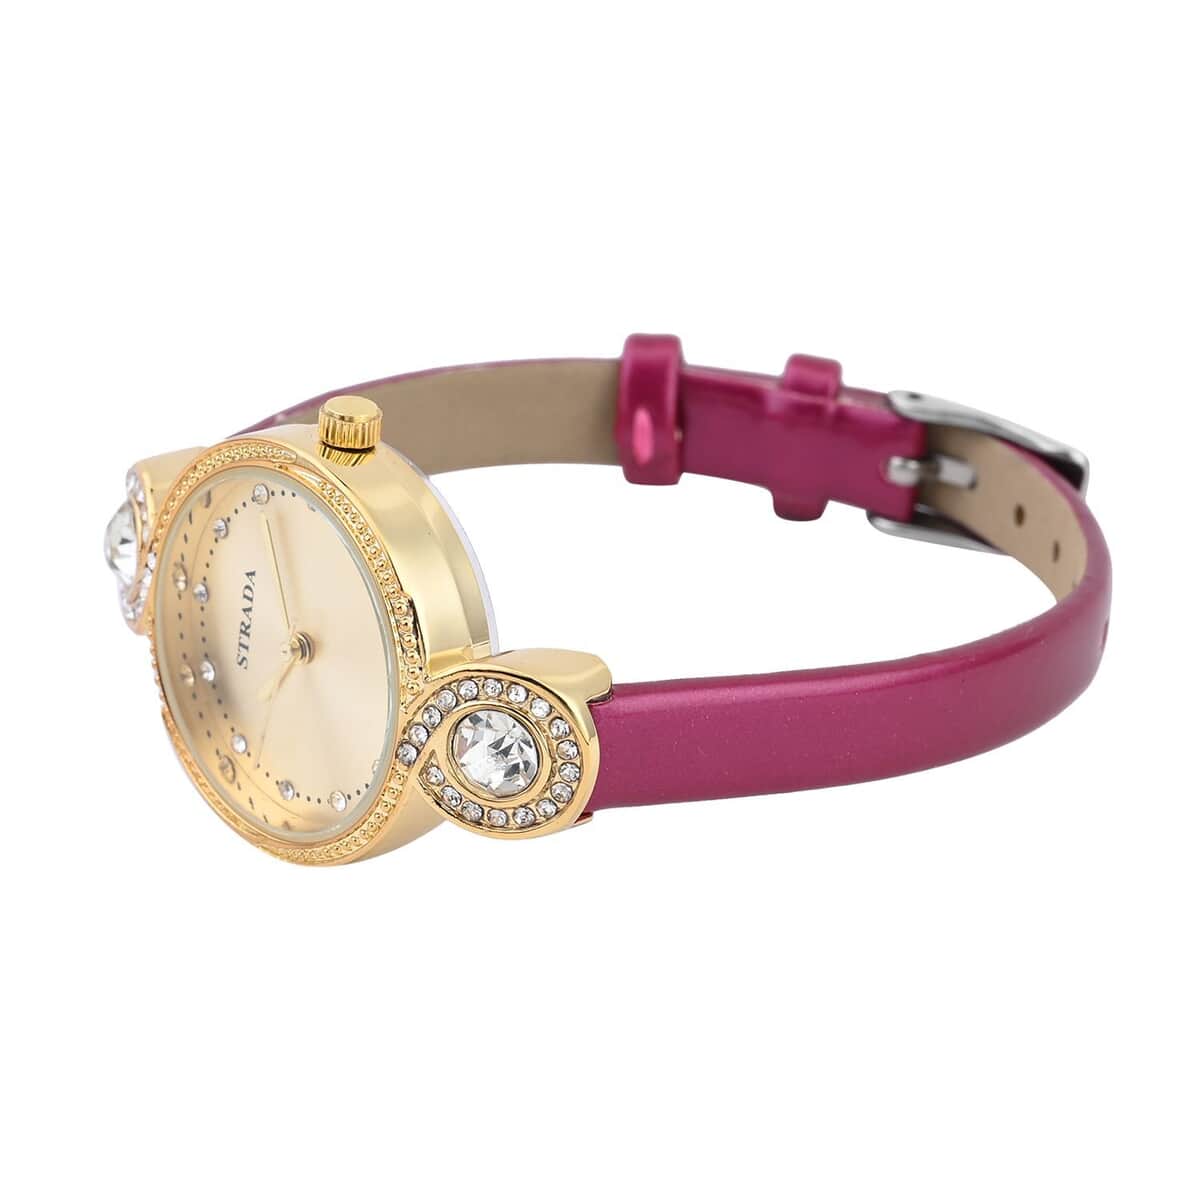 Strada Austrian Crystal Japanese Movement Infinity Watch in Goldtone with Fuchsia Faux Leather Strap (28.20mm) (5.75-7.50 Inches) image number 4